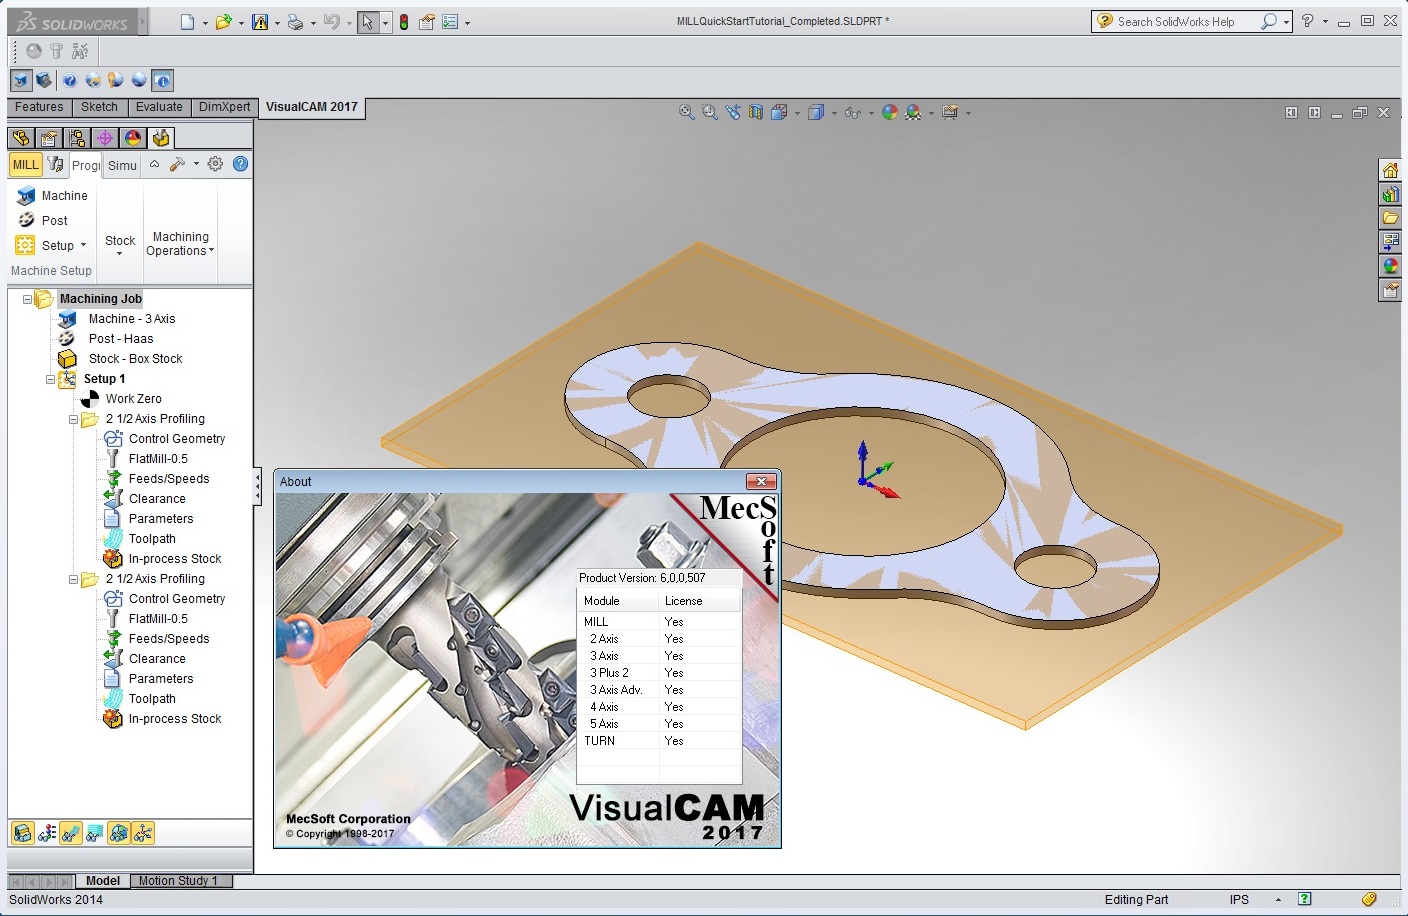 Working with MecSoft VisualCAM 2017 (v6.0.507) for SolidWorks 2010-2018